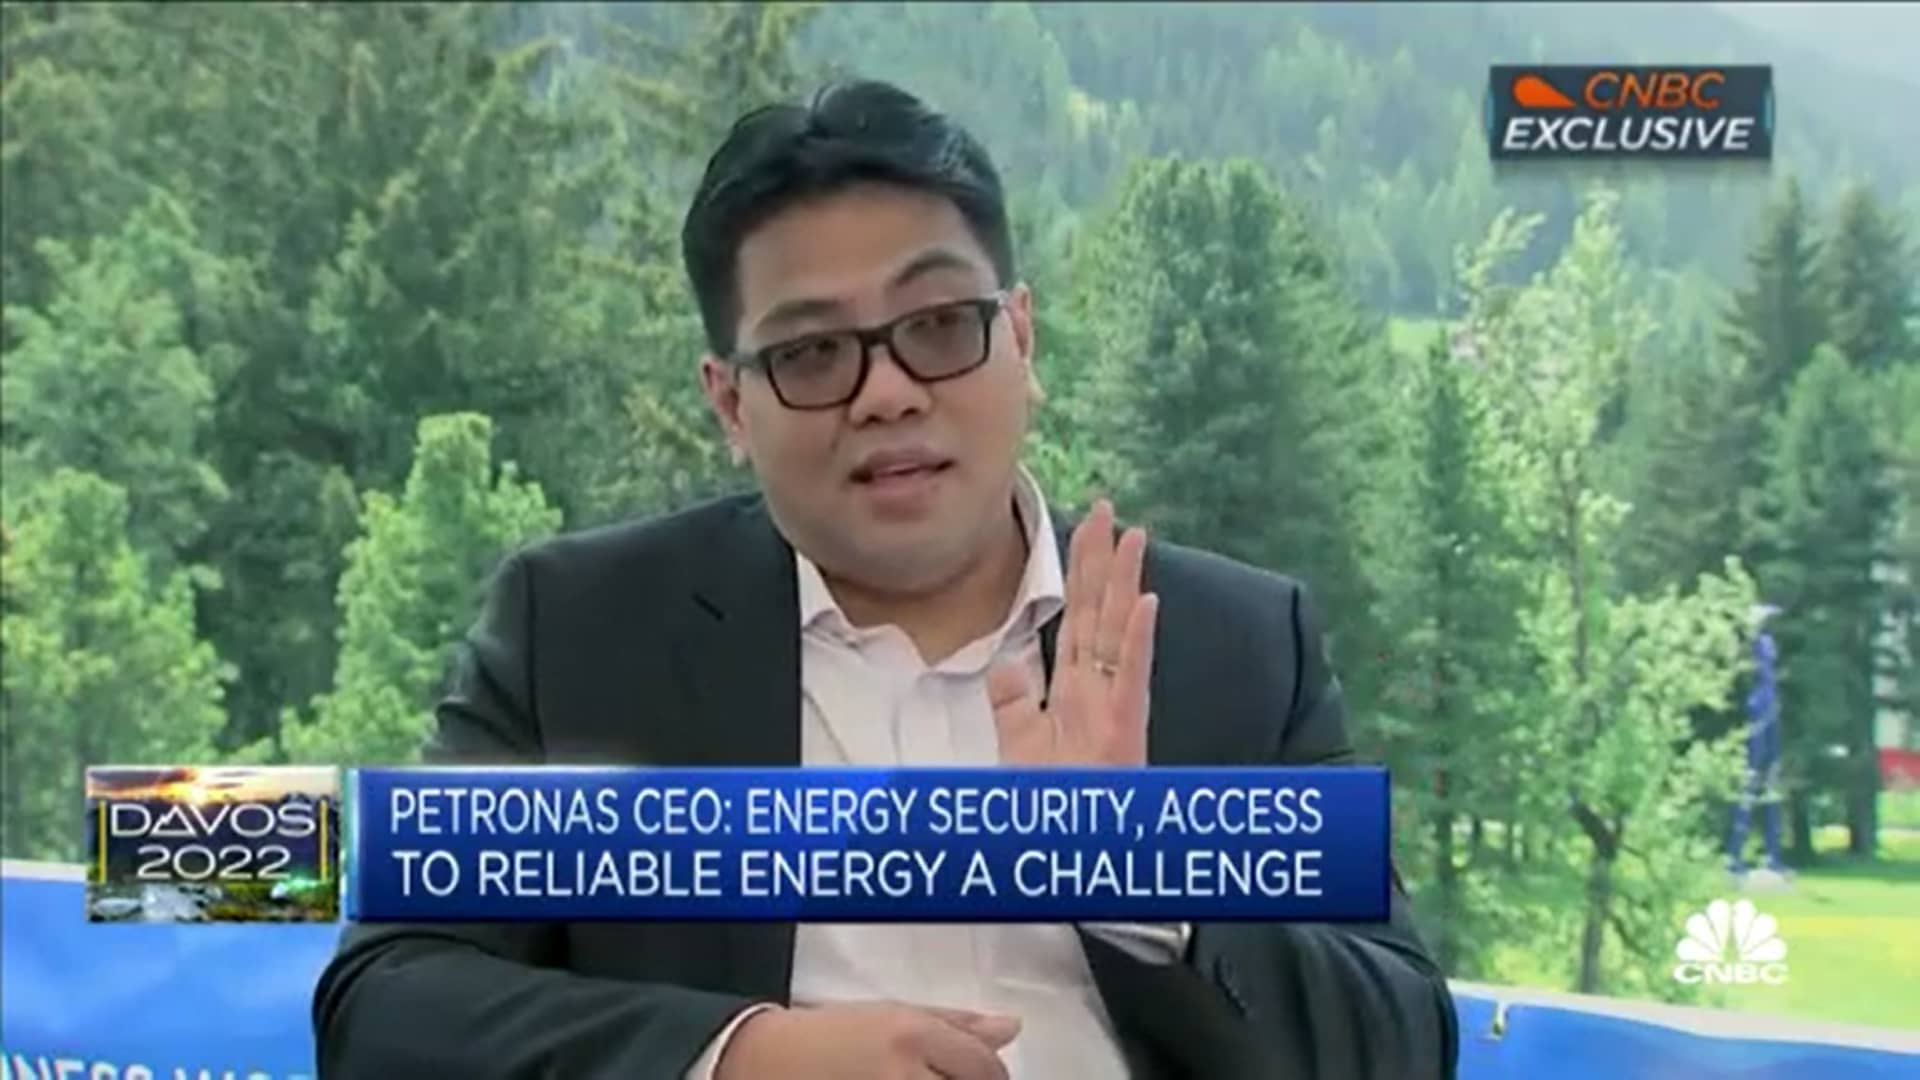 Energy security is at the 'front and center' again, says Petronas